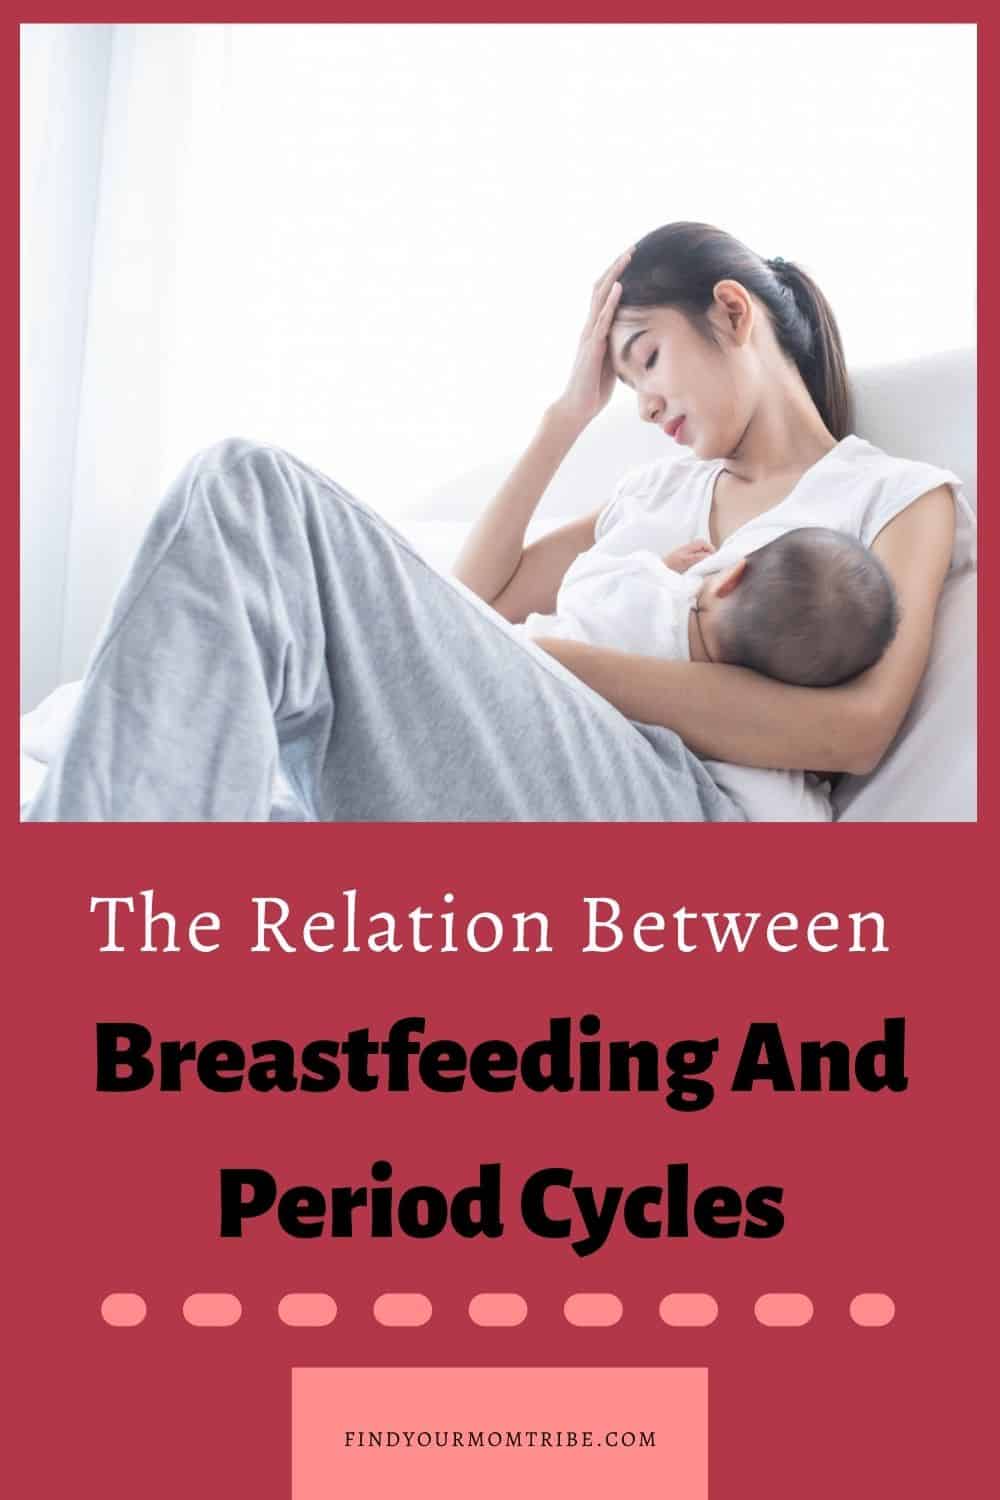 The Relation Between Breastfeeding And Period Cycles